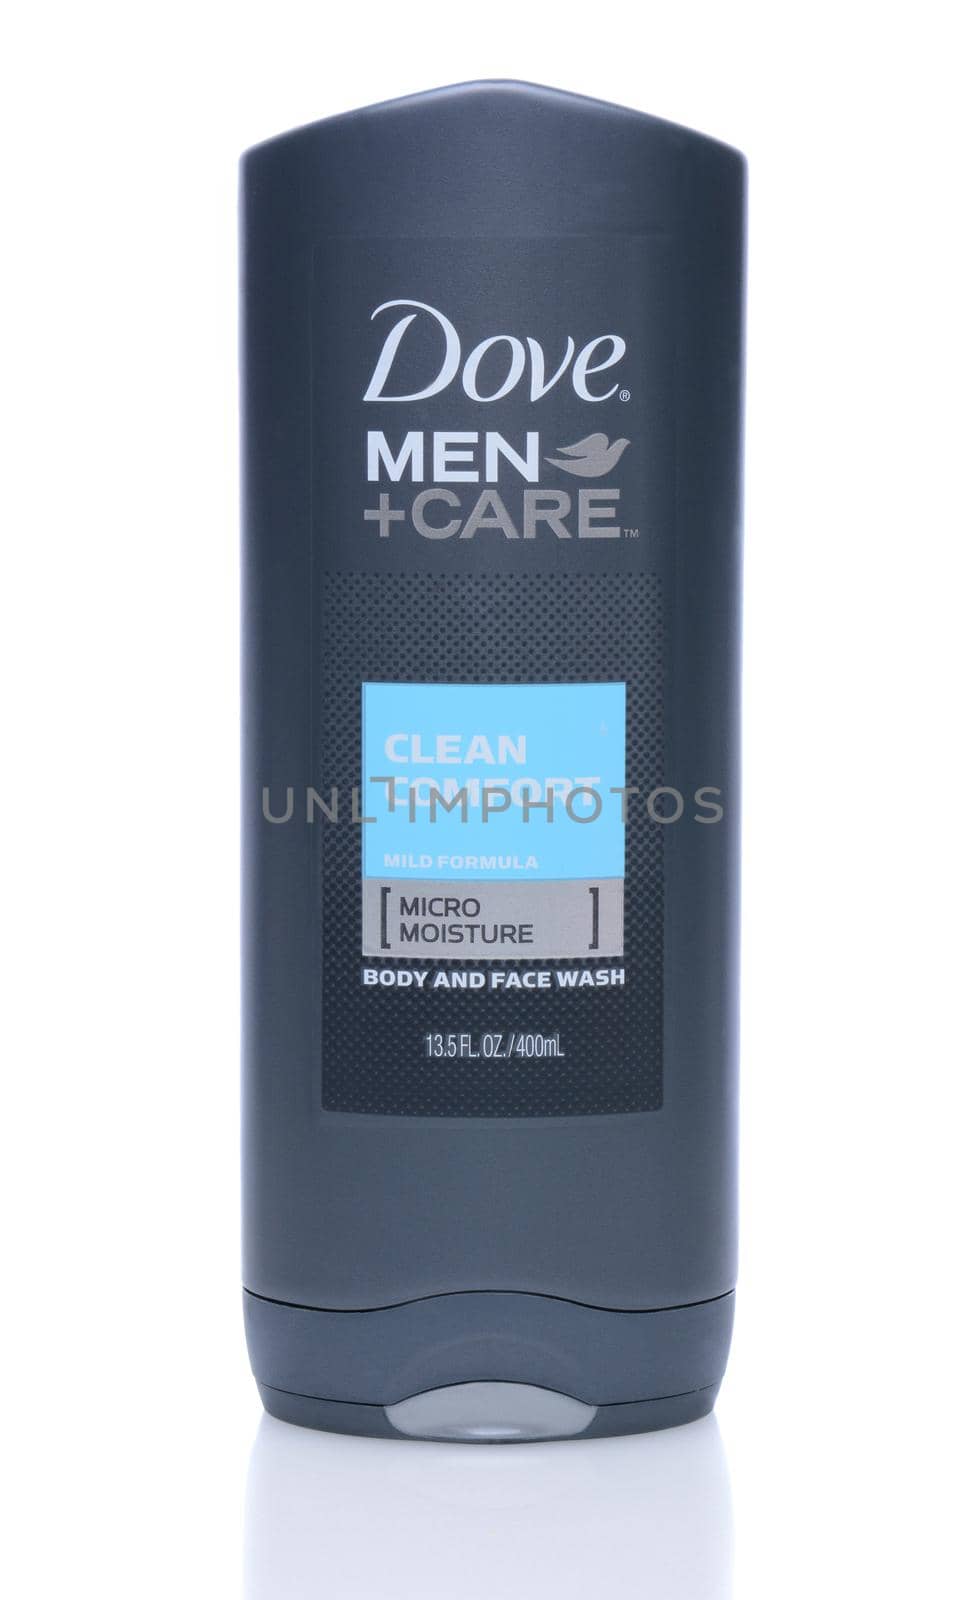 IRVINE, CA - May 14, 2014: A 13.5oz bottle of Dove Men +Care Body and Face Wash. Dove is a personal care brand owned by Unilever.